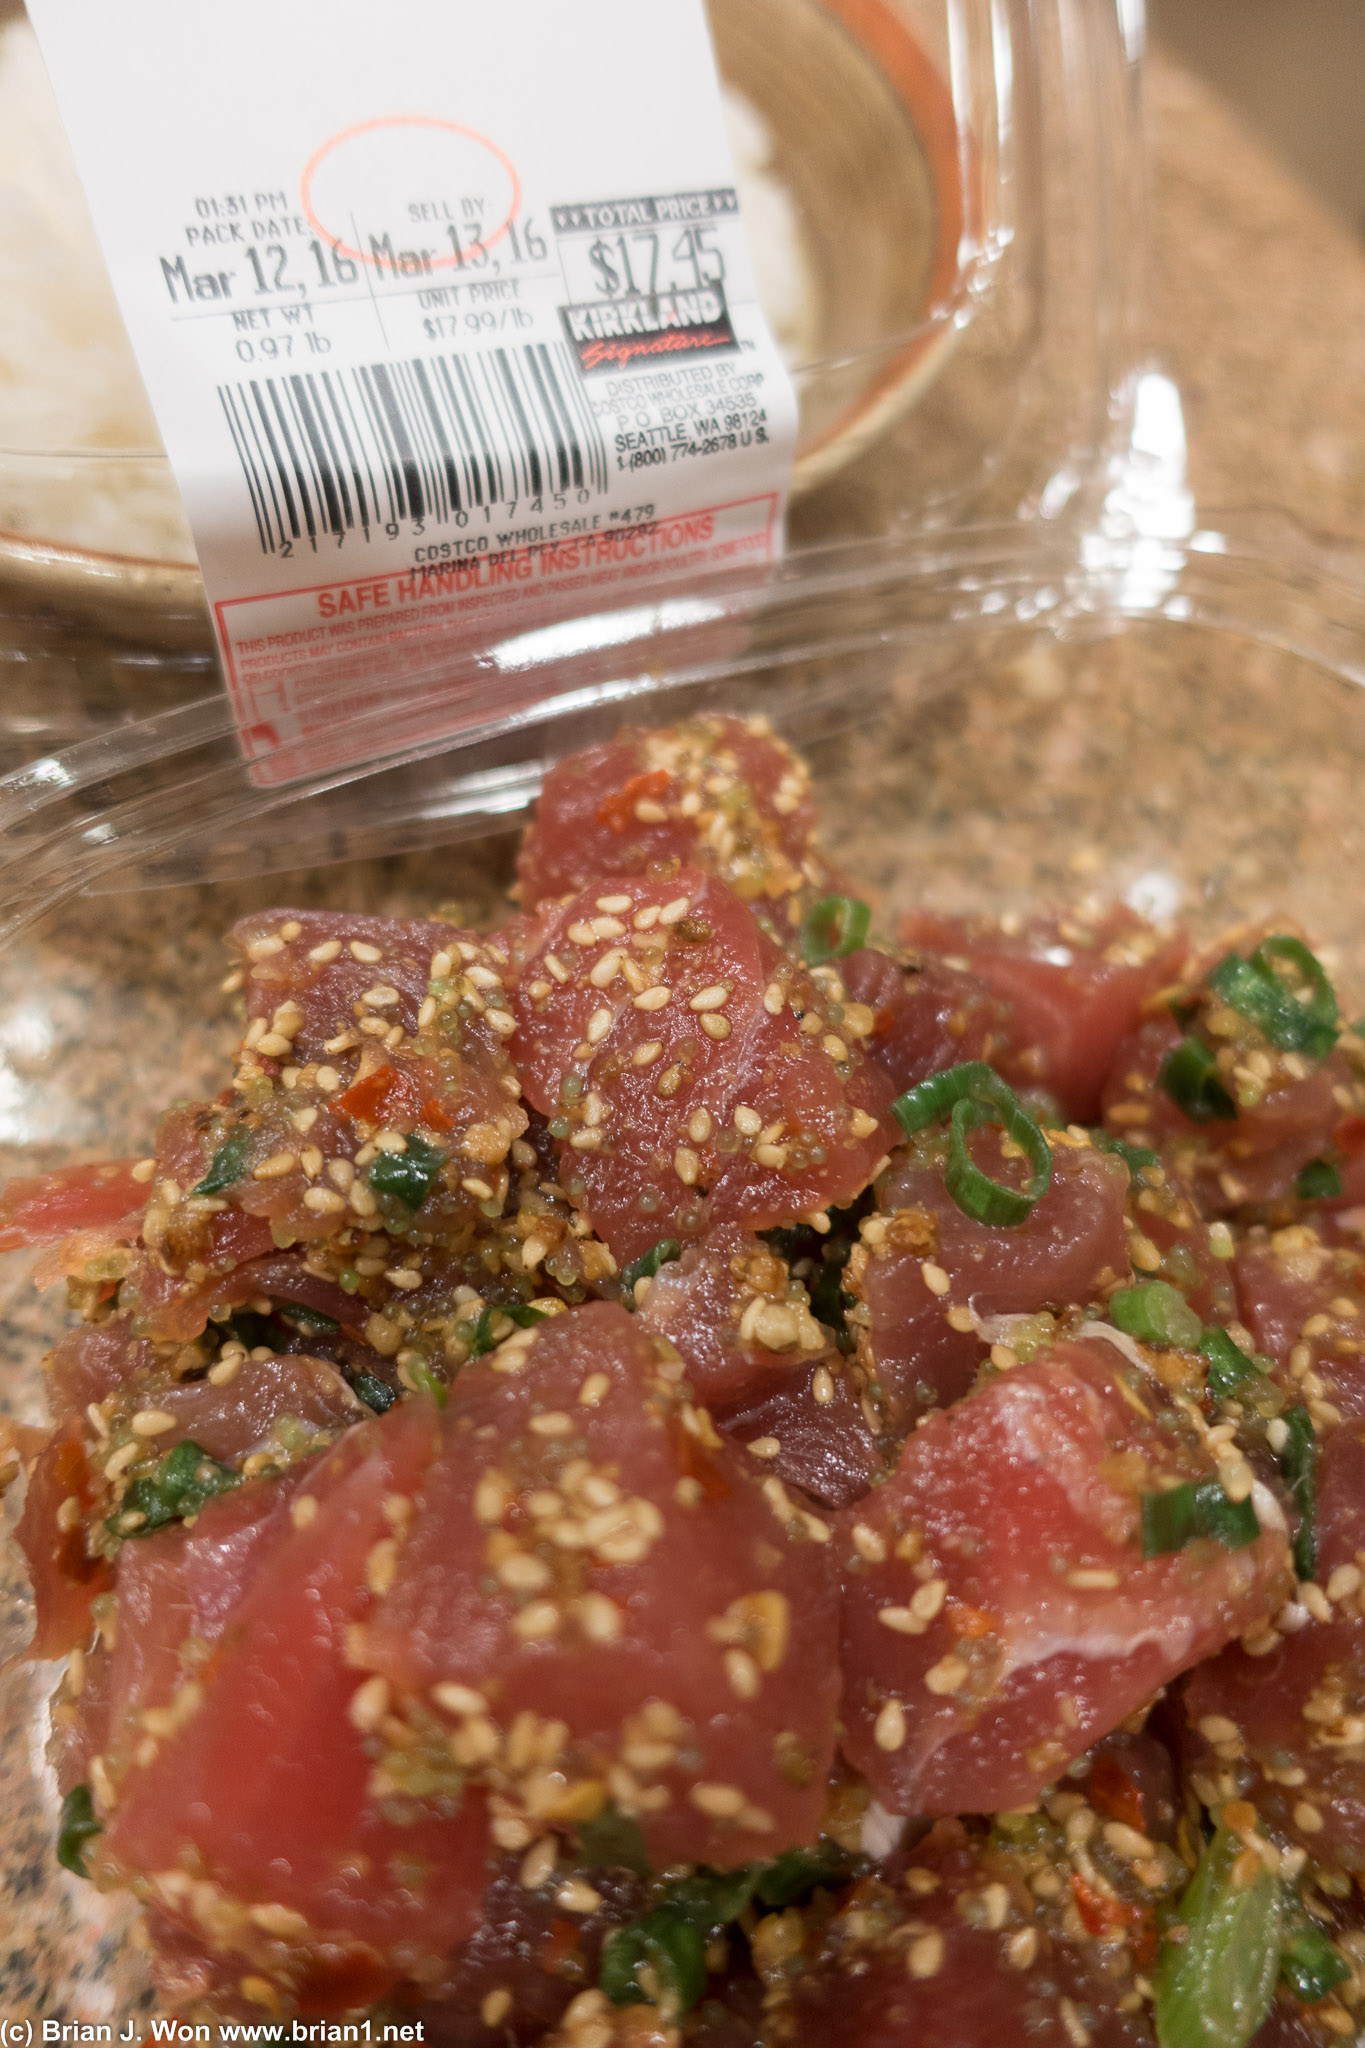 Apparently I am behind the times, did not know Costco sold poke! Nom nom...